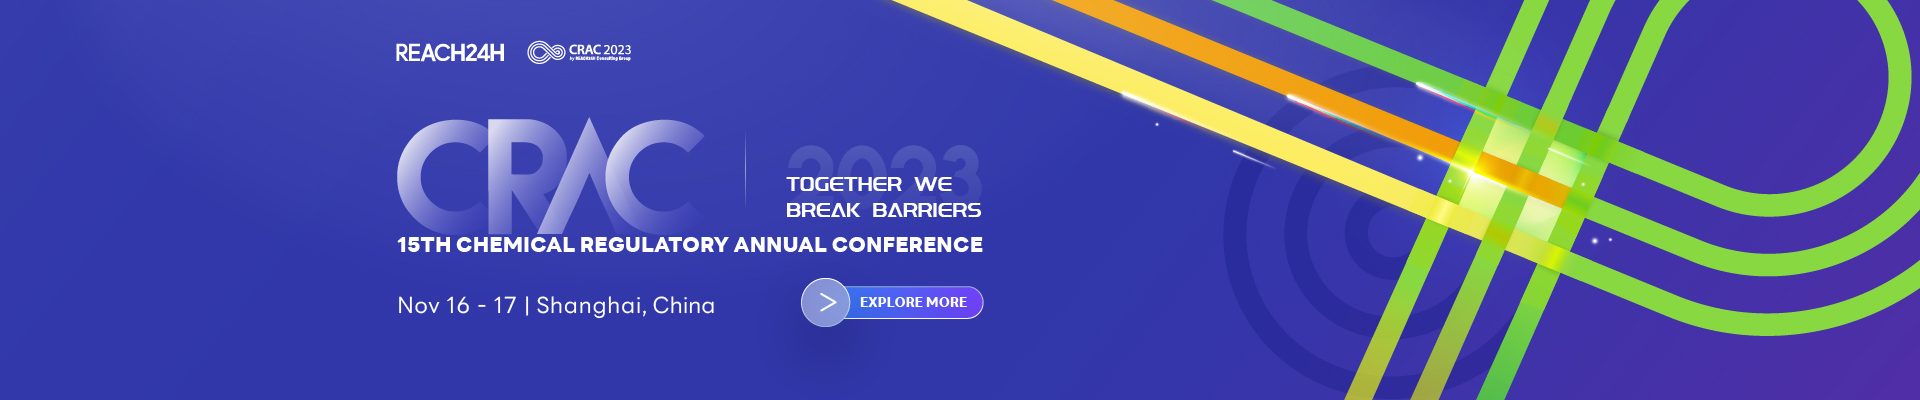 15th Chemical Regulatory Annual Conference: Together We Break Barriers - CRAC2023